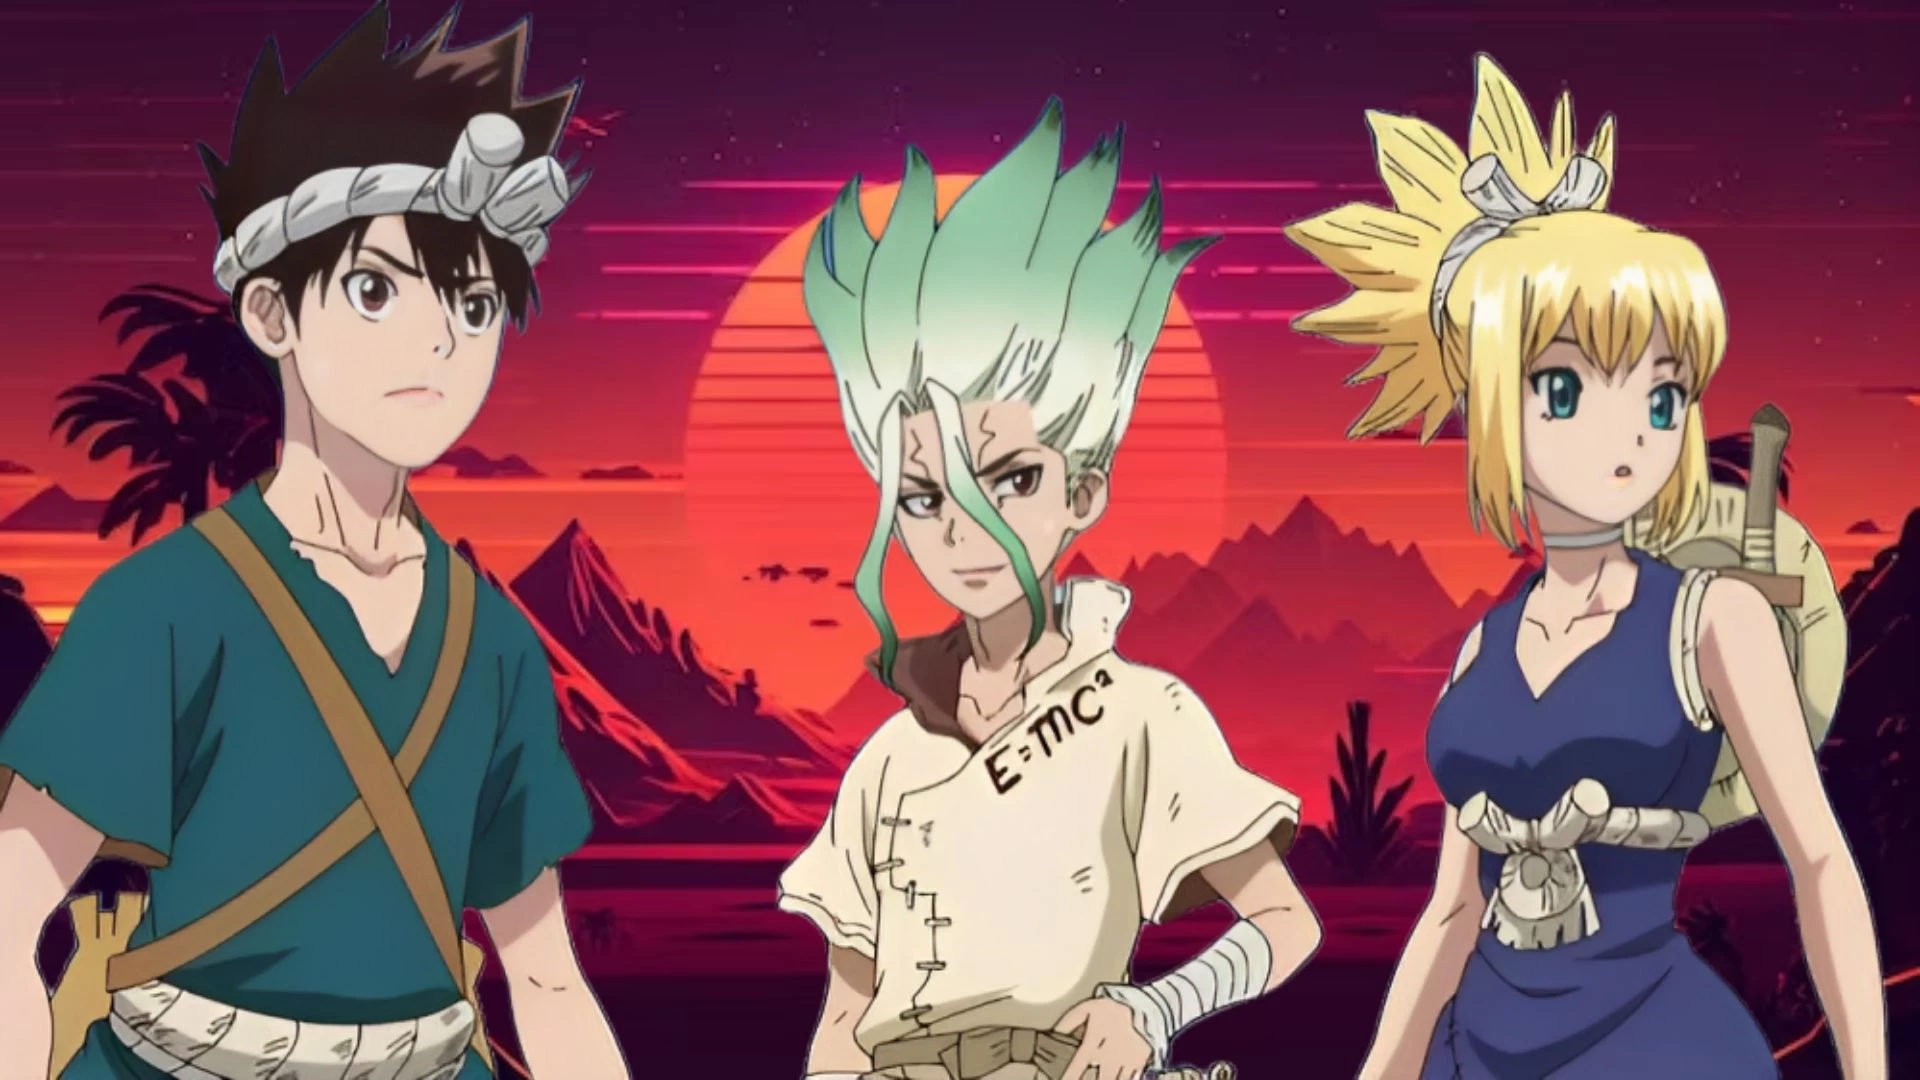 Dr Stone Season 3 Part 2 Release Date and Time, Countdown, When Is It Coming Out?